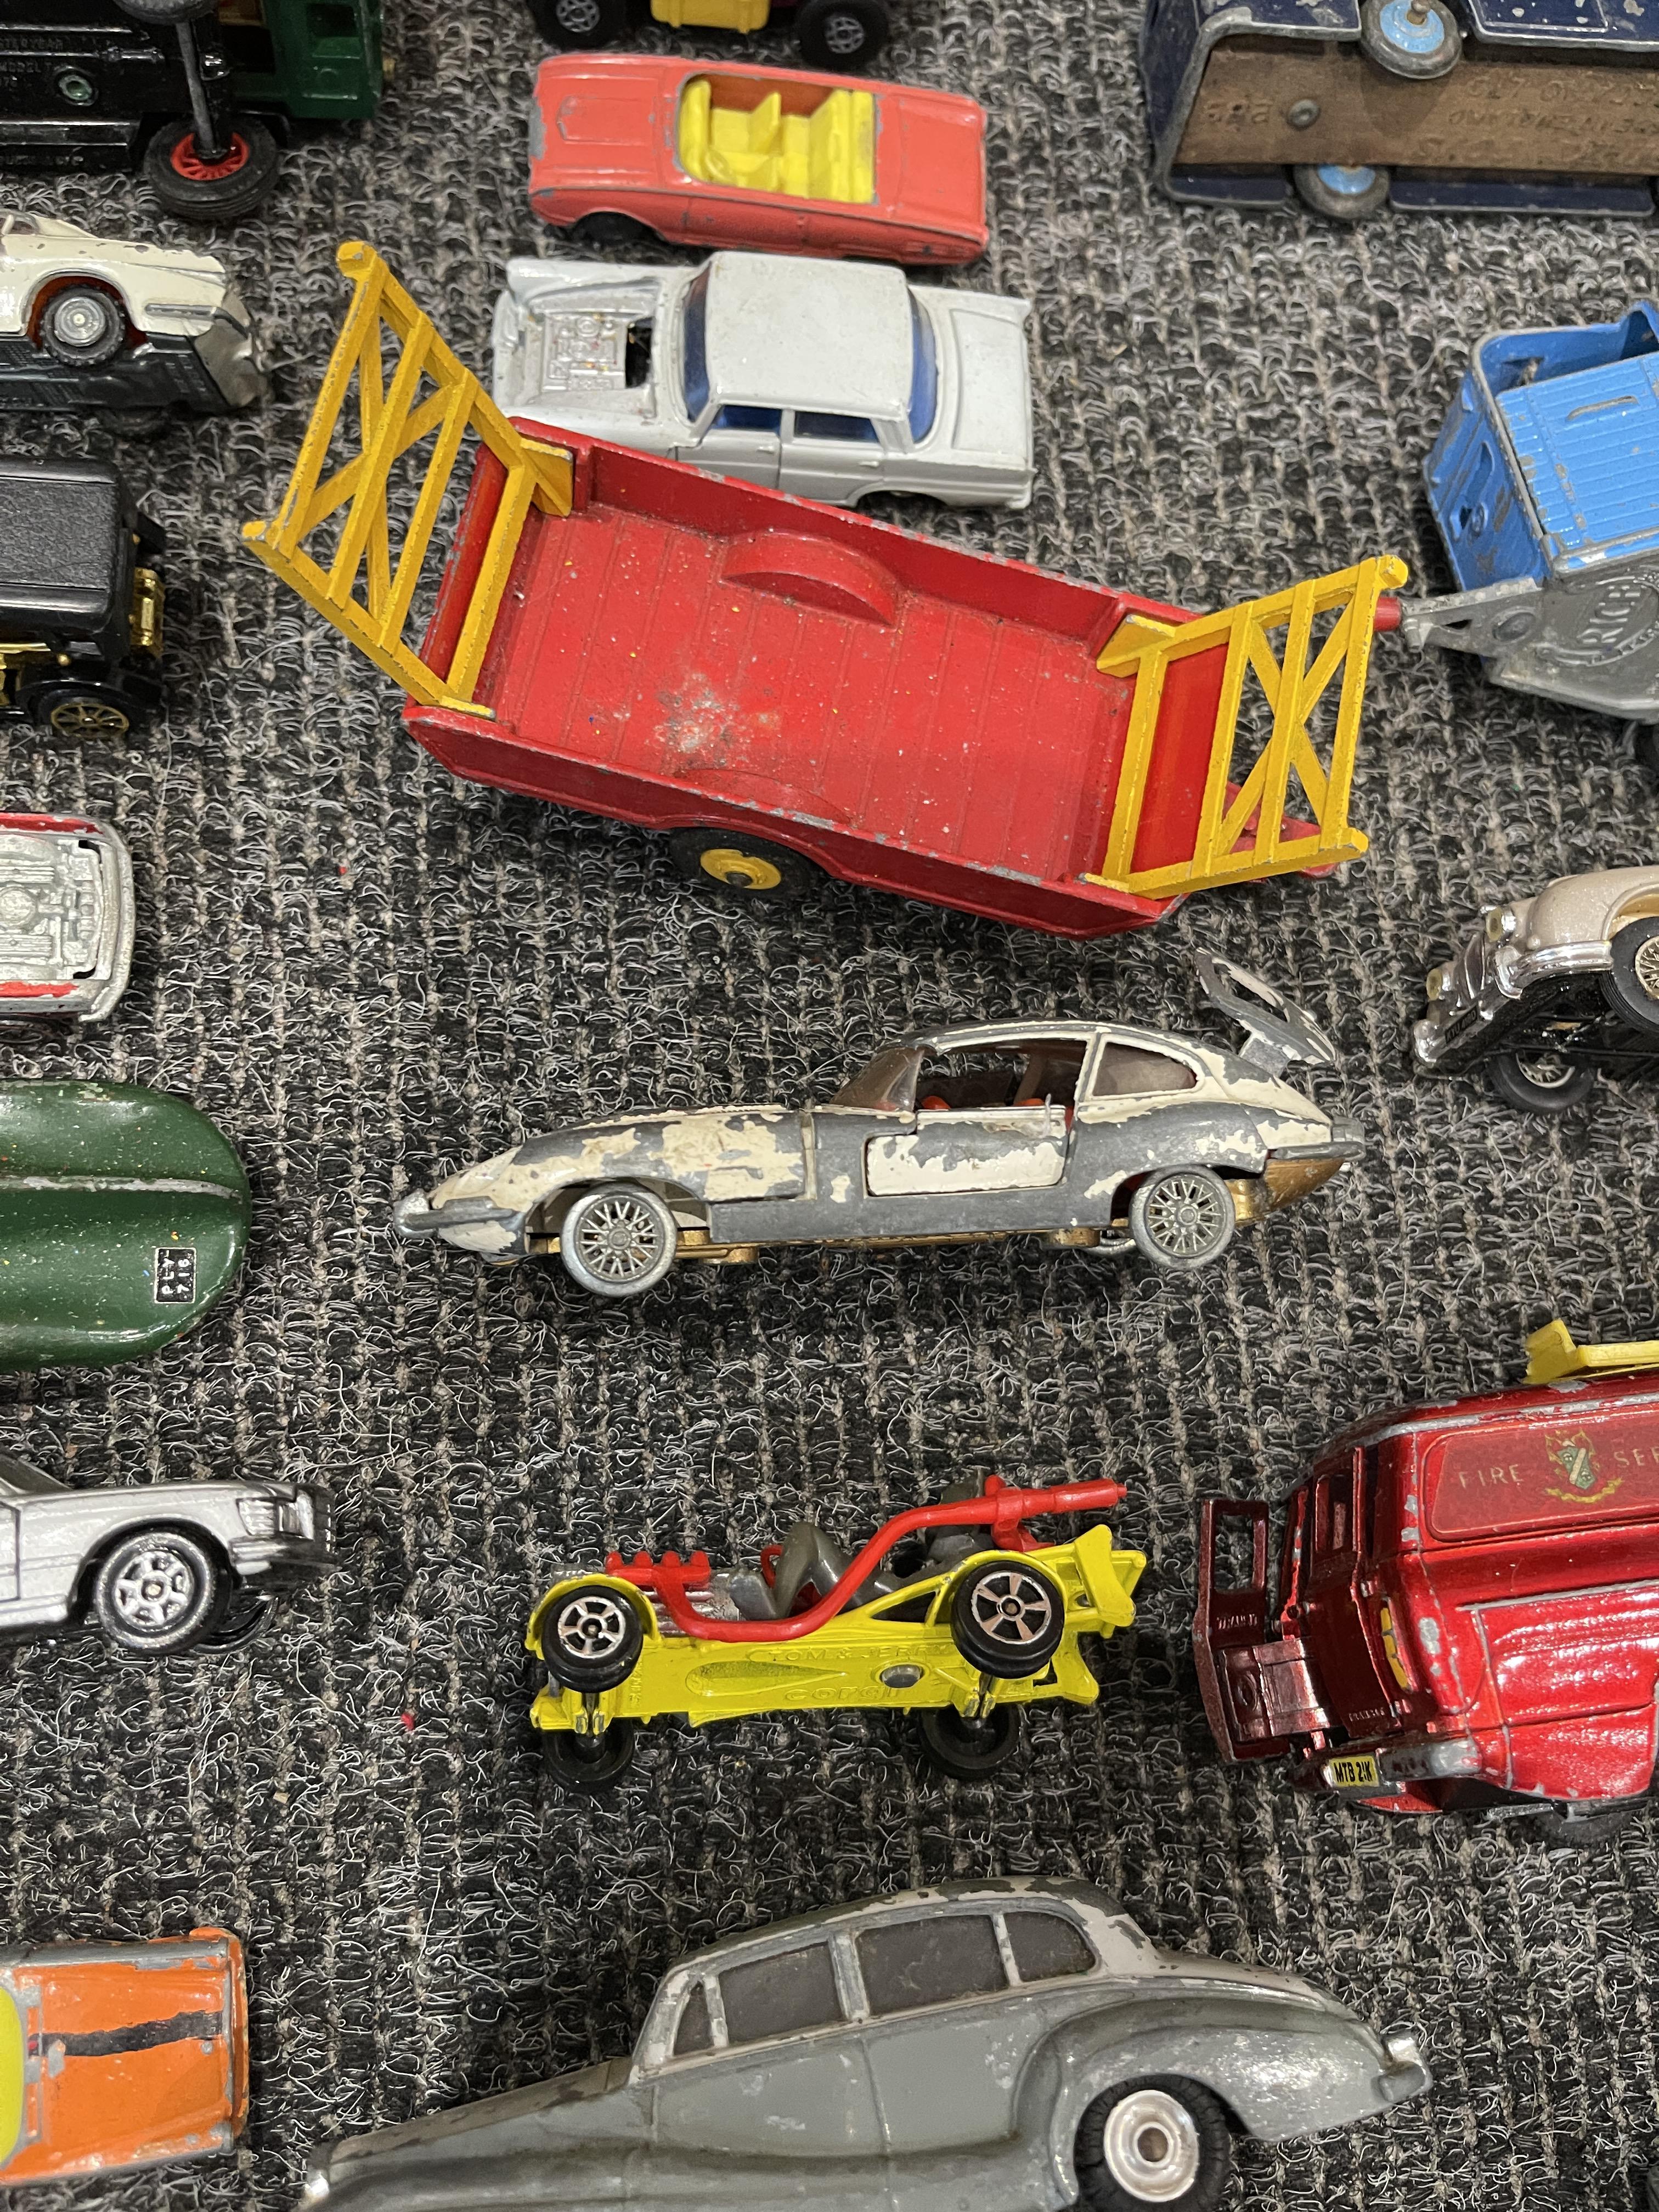 Metal army tin and vintage vehicles - Image 27 of 28